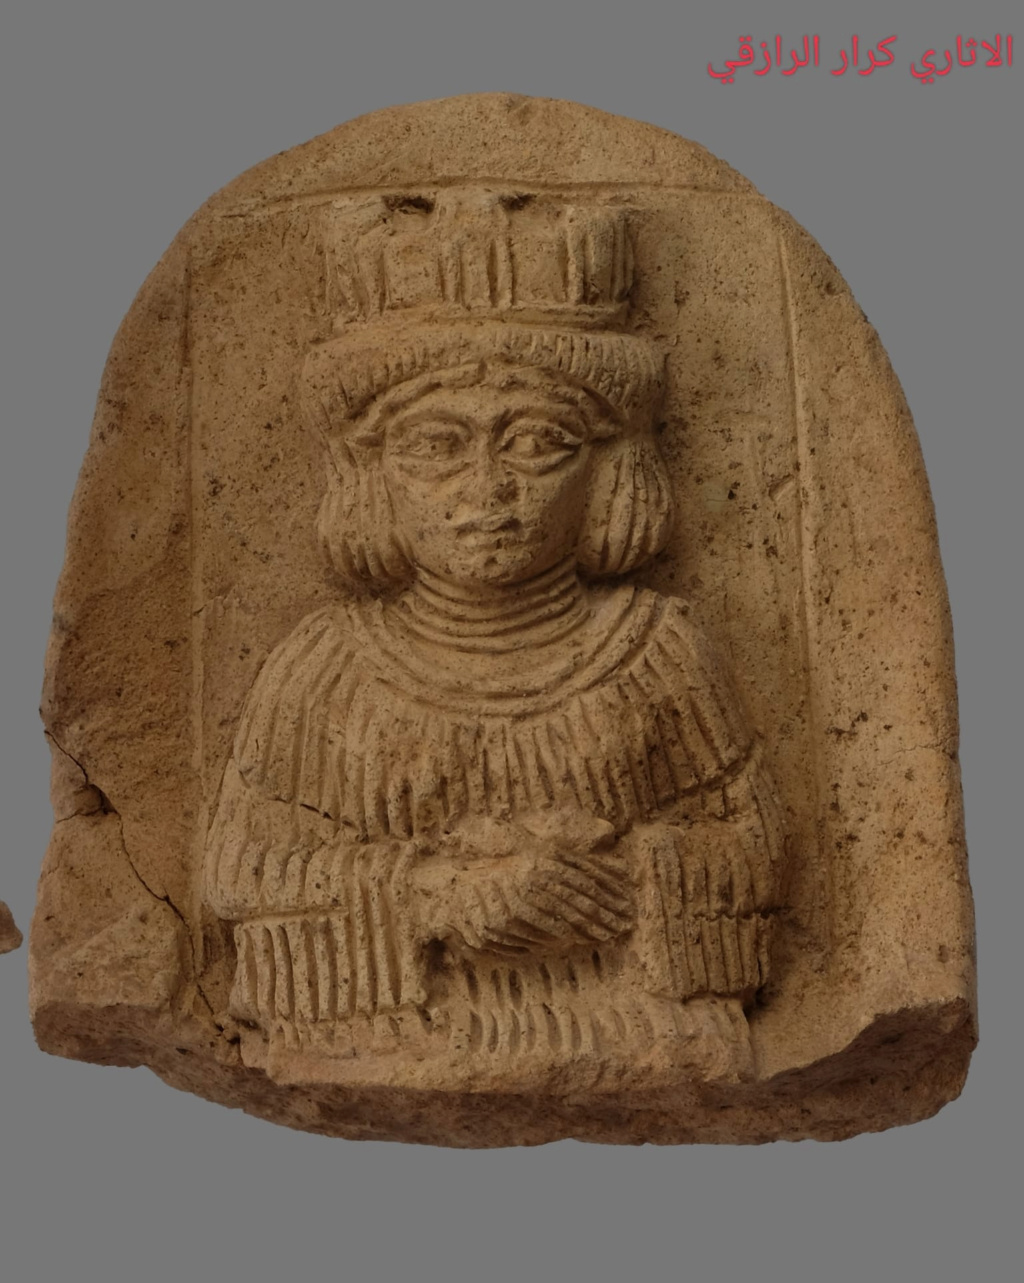 One of the important discoveries of a statue dating back 5000 years in the city of Garsu (Telo) 1-744